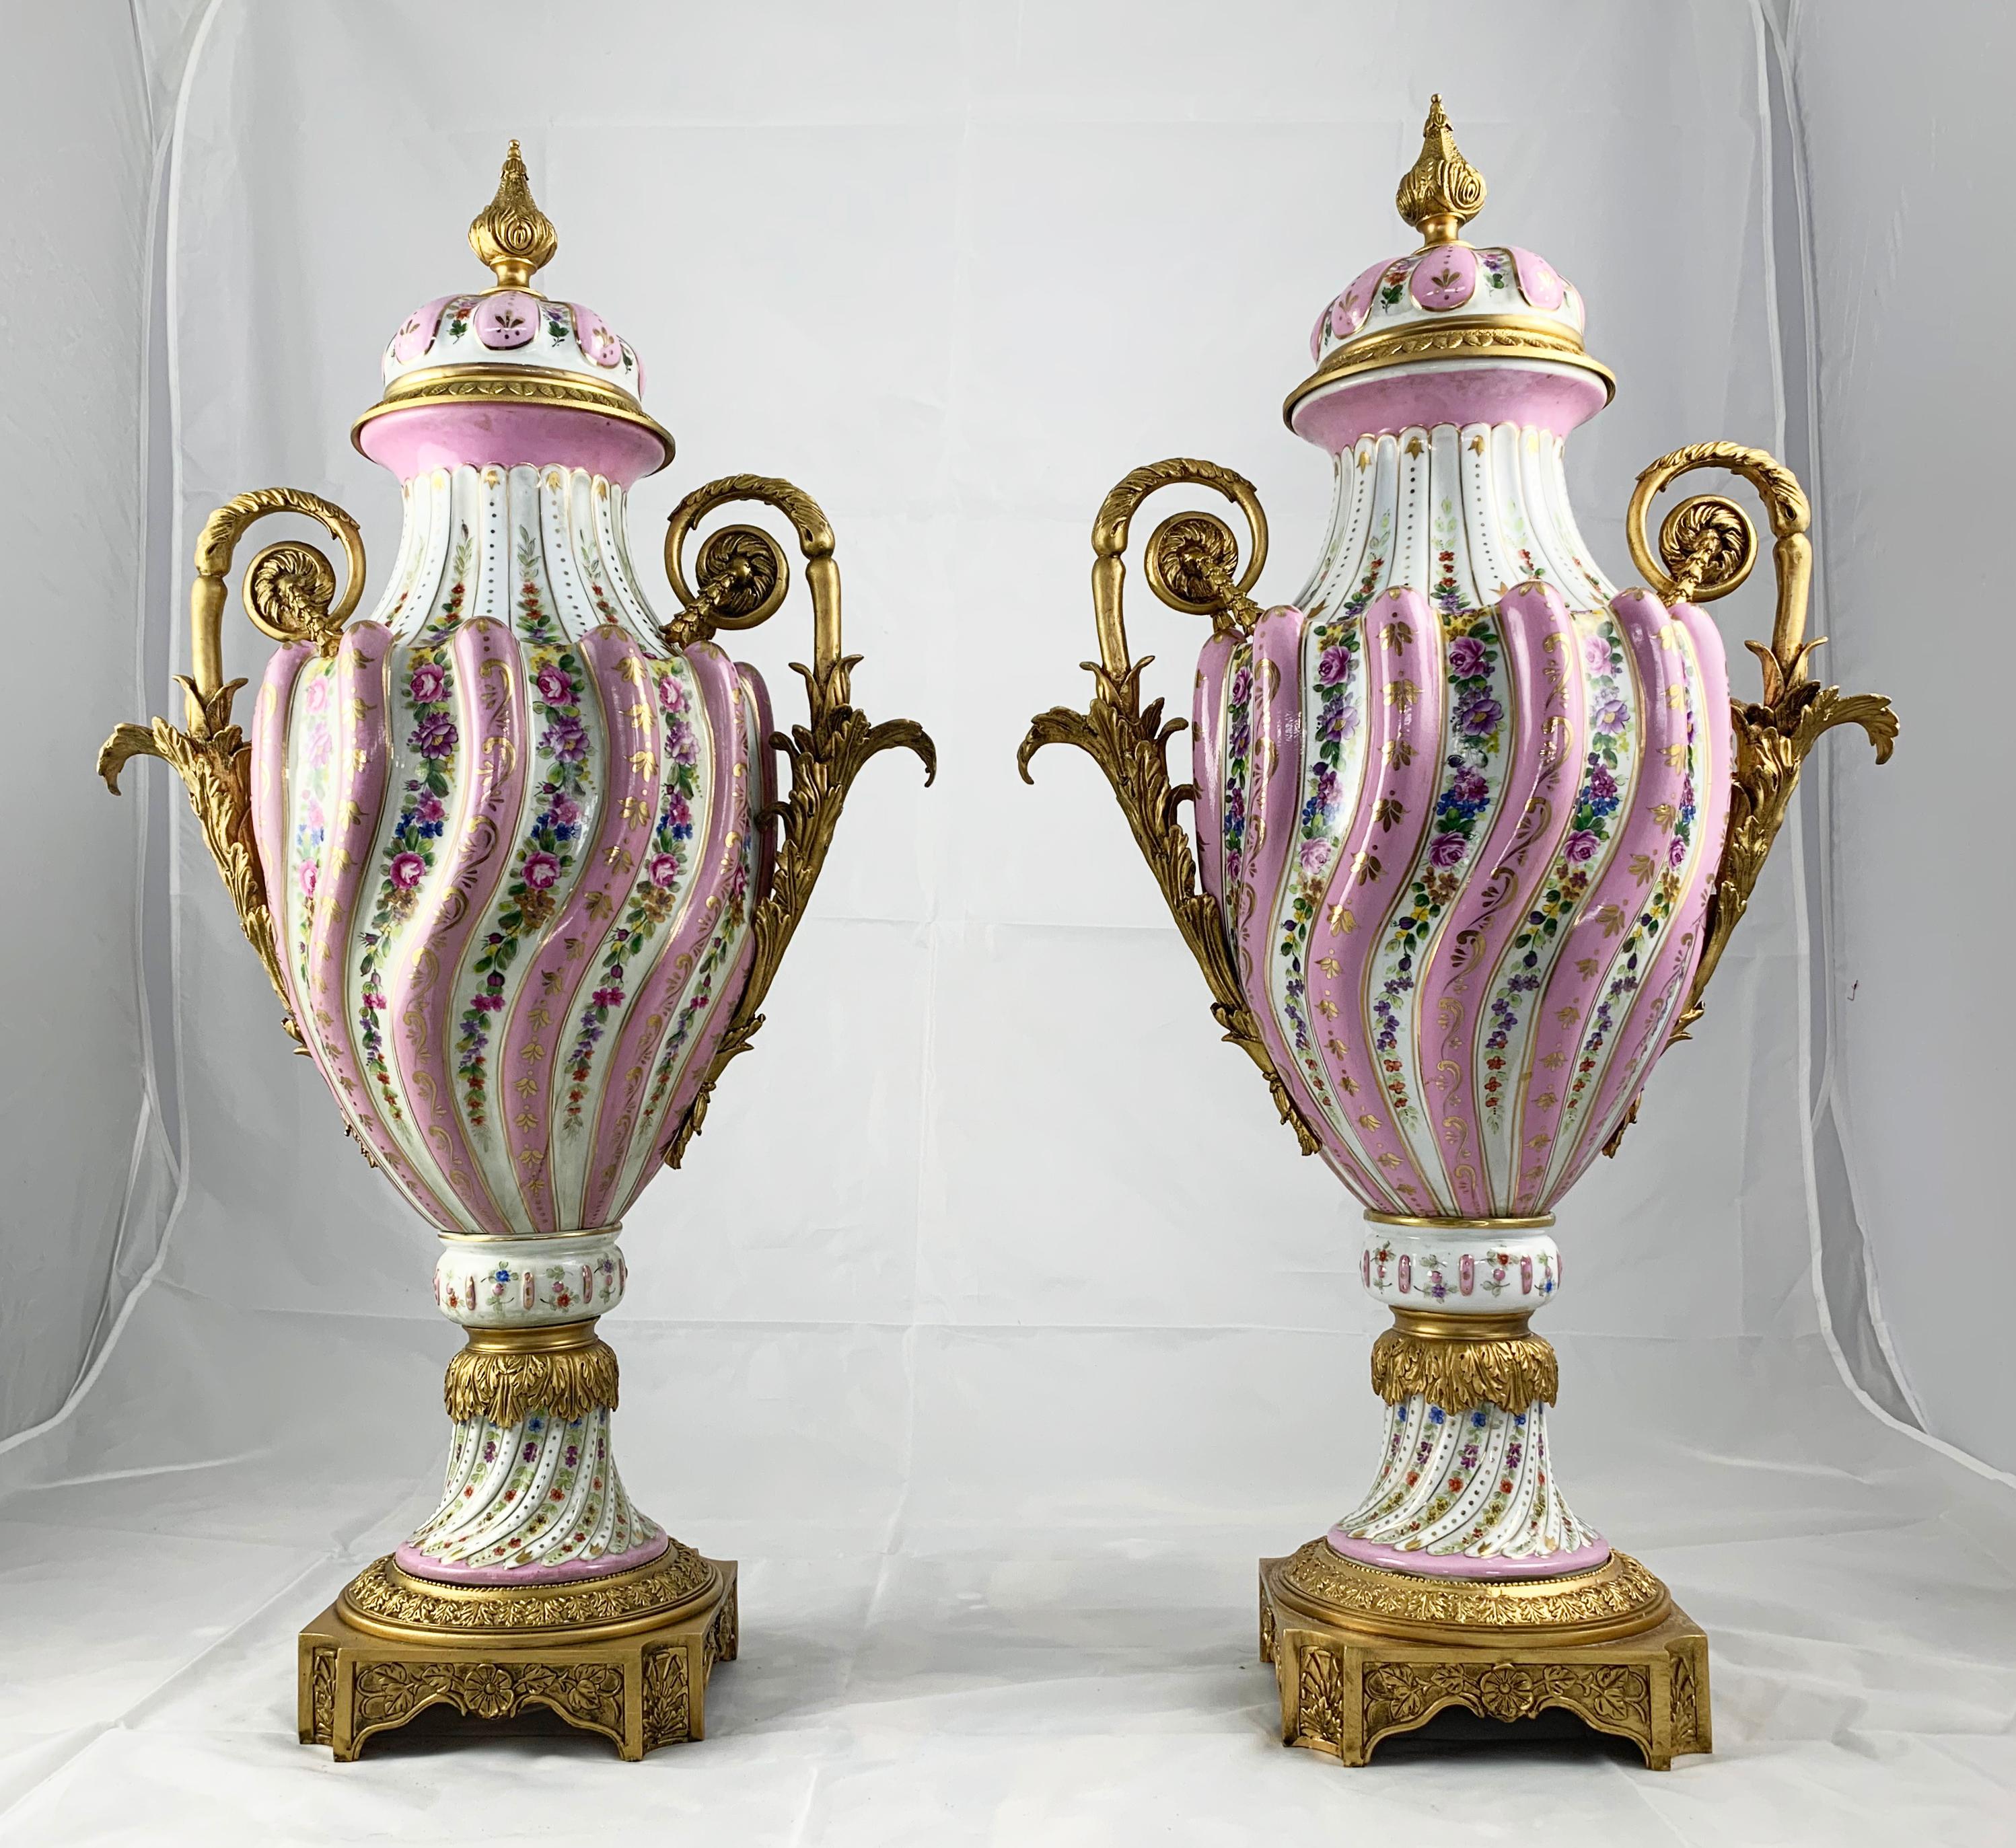 A fine pair of Sevres porcelain two handled vases and covers with ormolu mounts. 19th century. Each with spiral lobed decoration picked out with flowers on a pink ground. The mounts cast with classical motifs. Supported on a shaped square base.